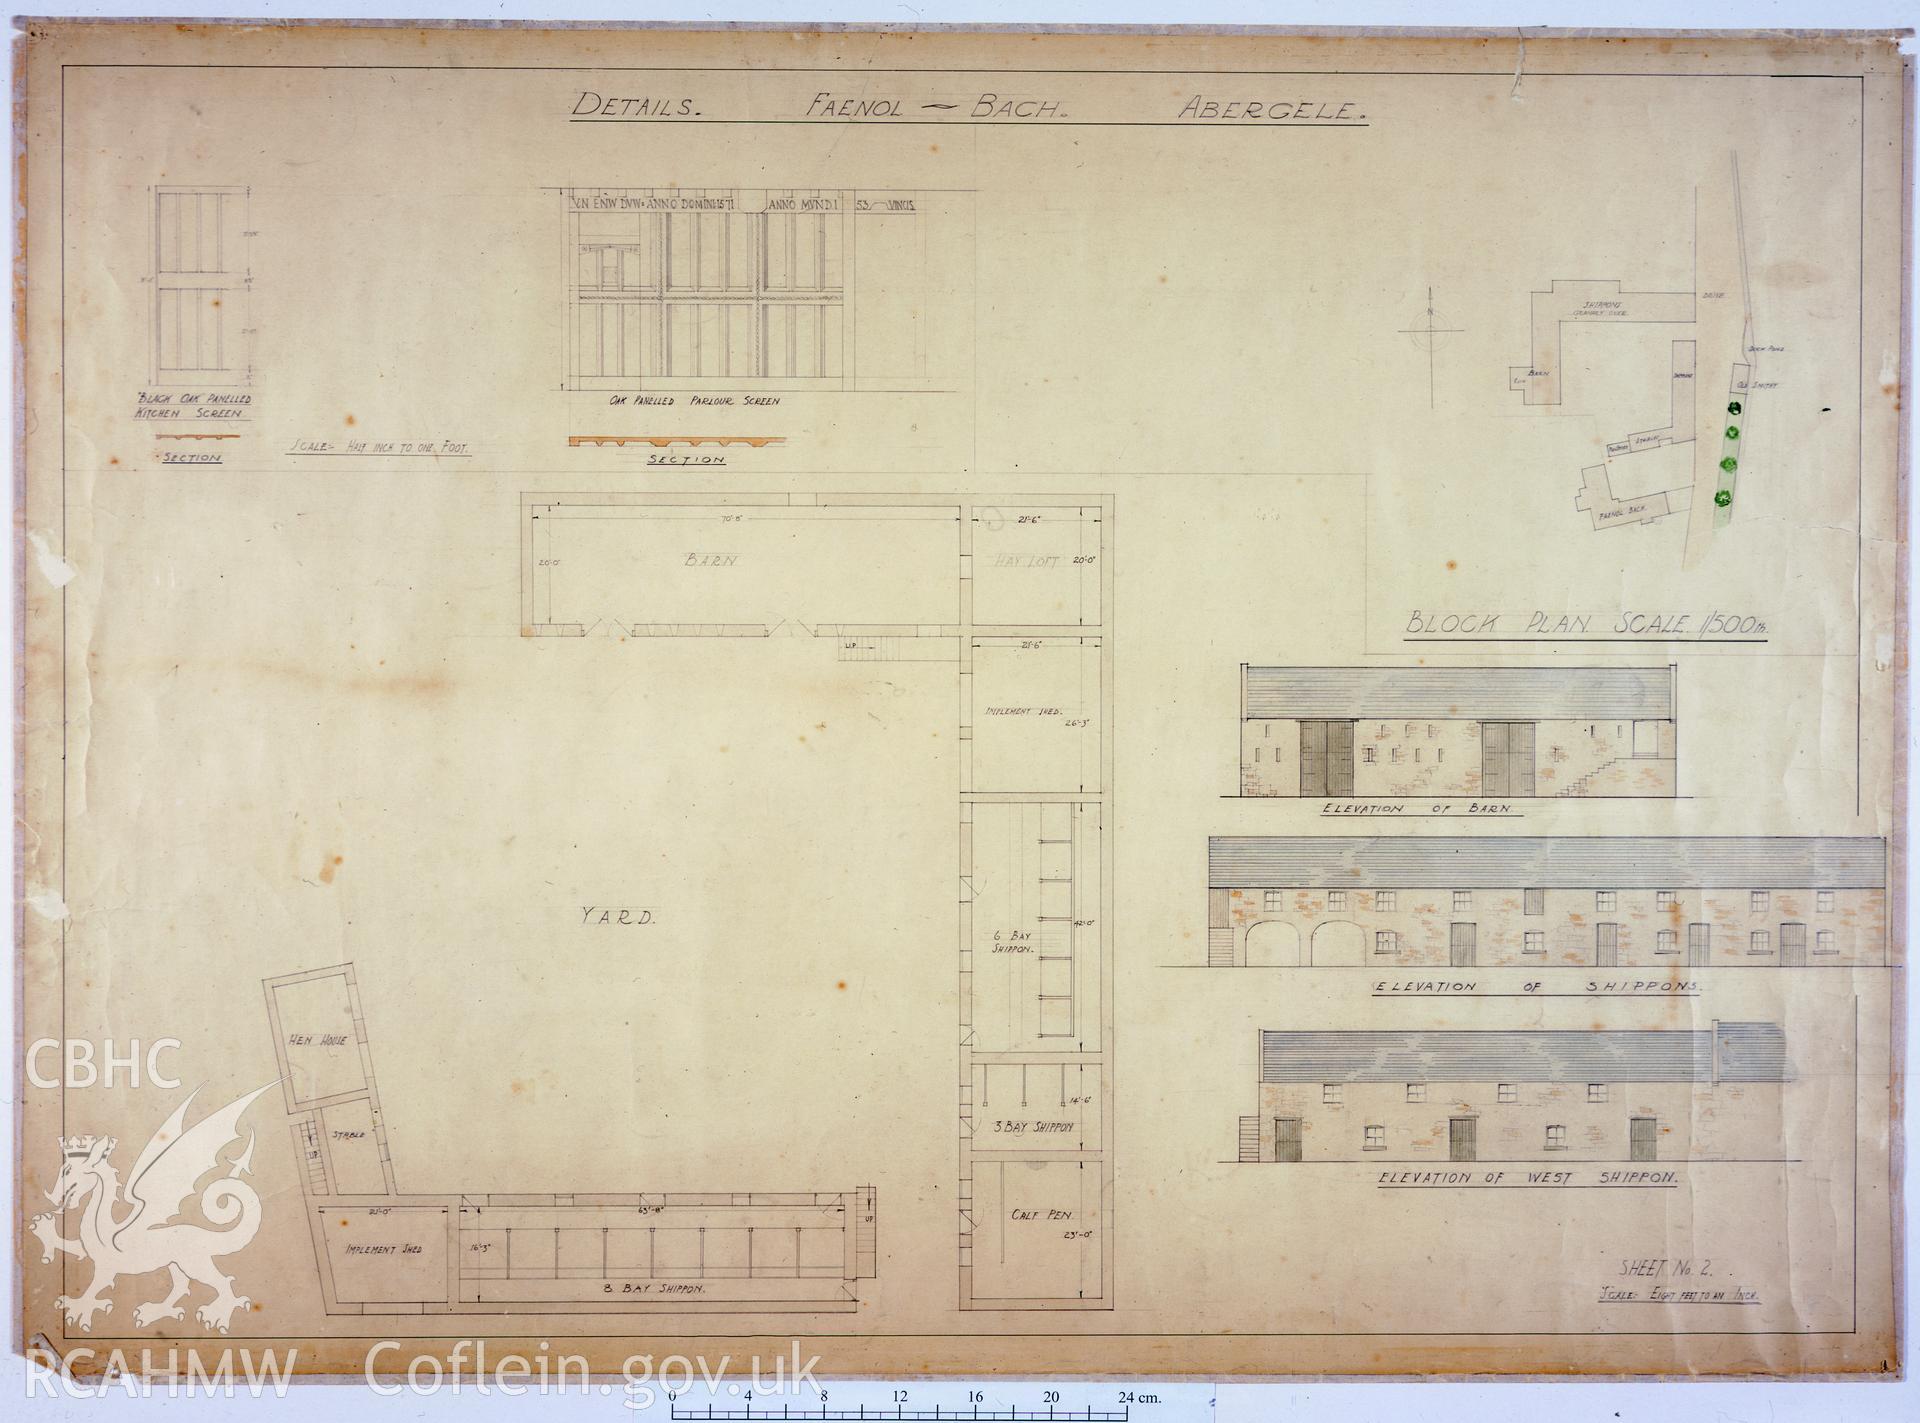 RCAHMW colour transparency showing measured drawings of Faenol Bach, Abergele.